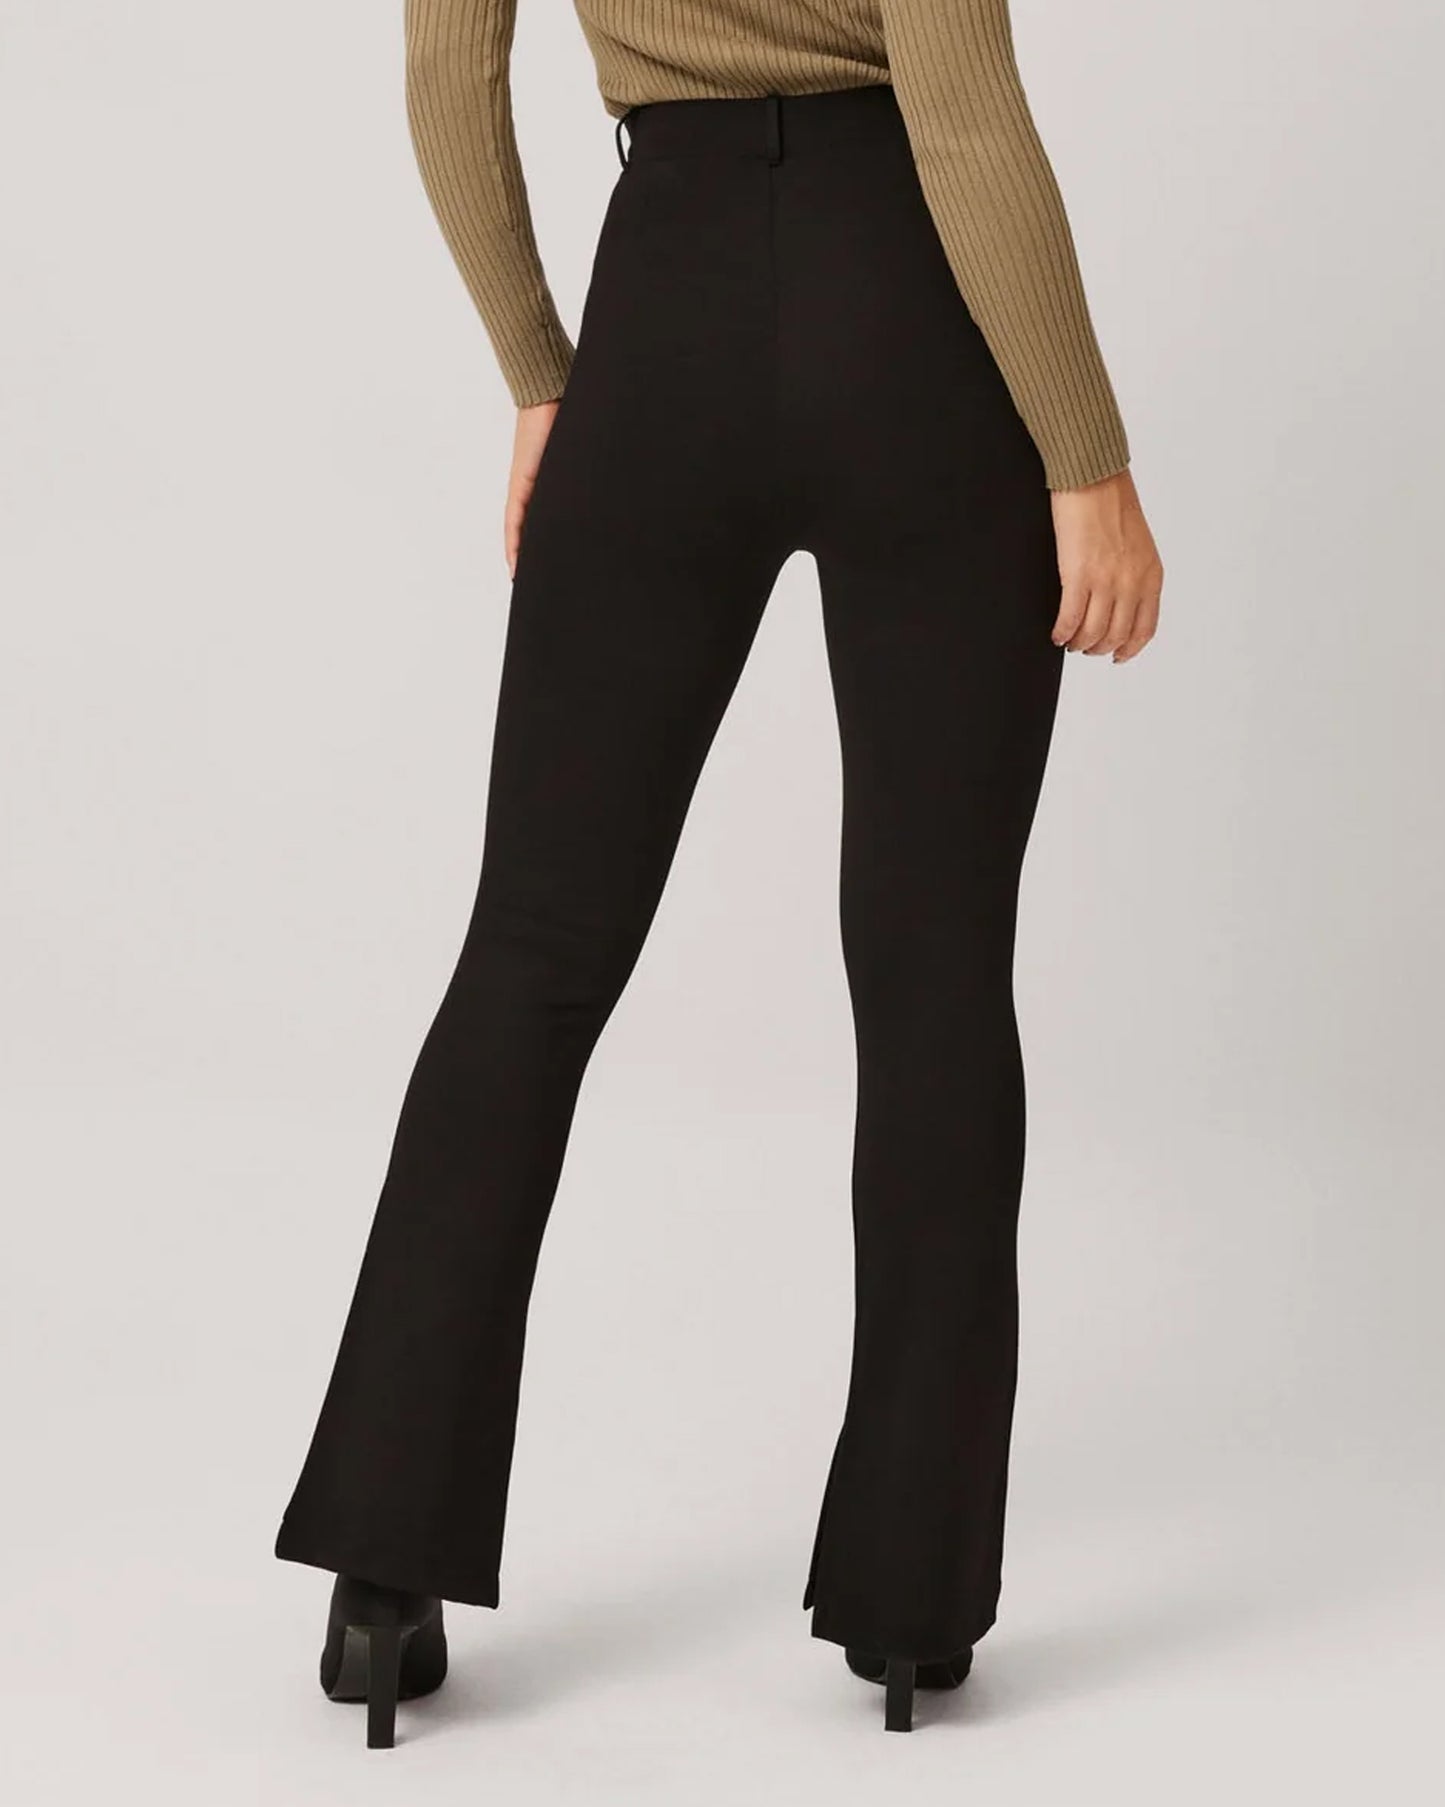 Ysabel Mora 70292 Flare Treggings - Black high waisted boot cut trouser leggings with belt loops and inside slits at the bottom.